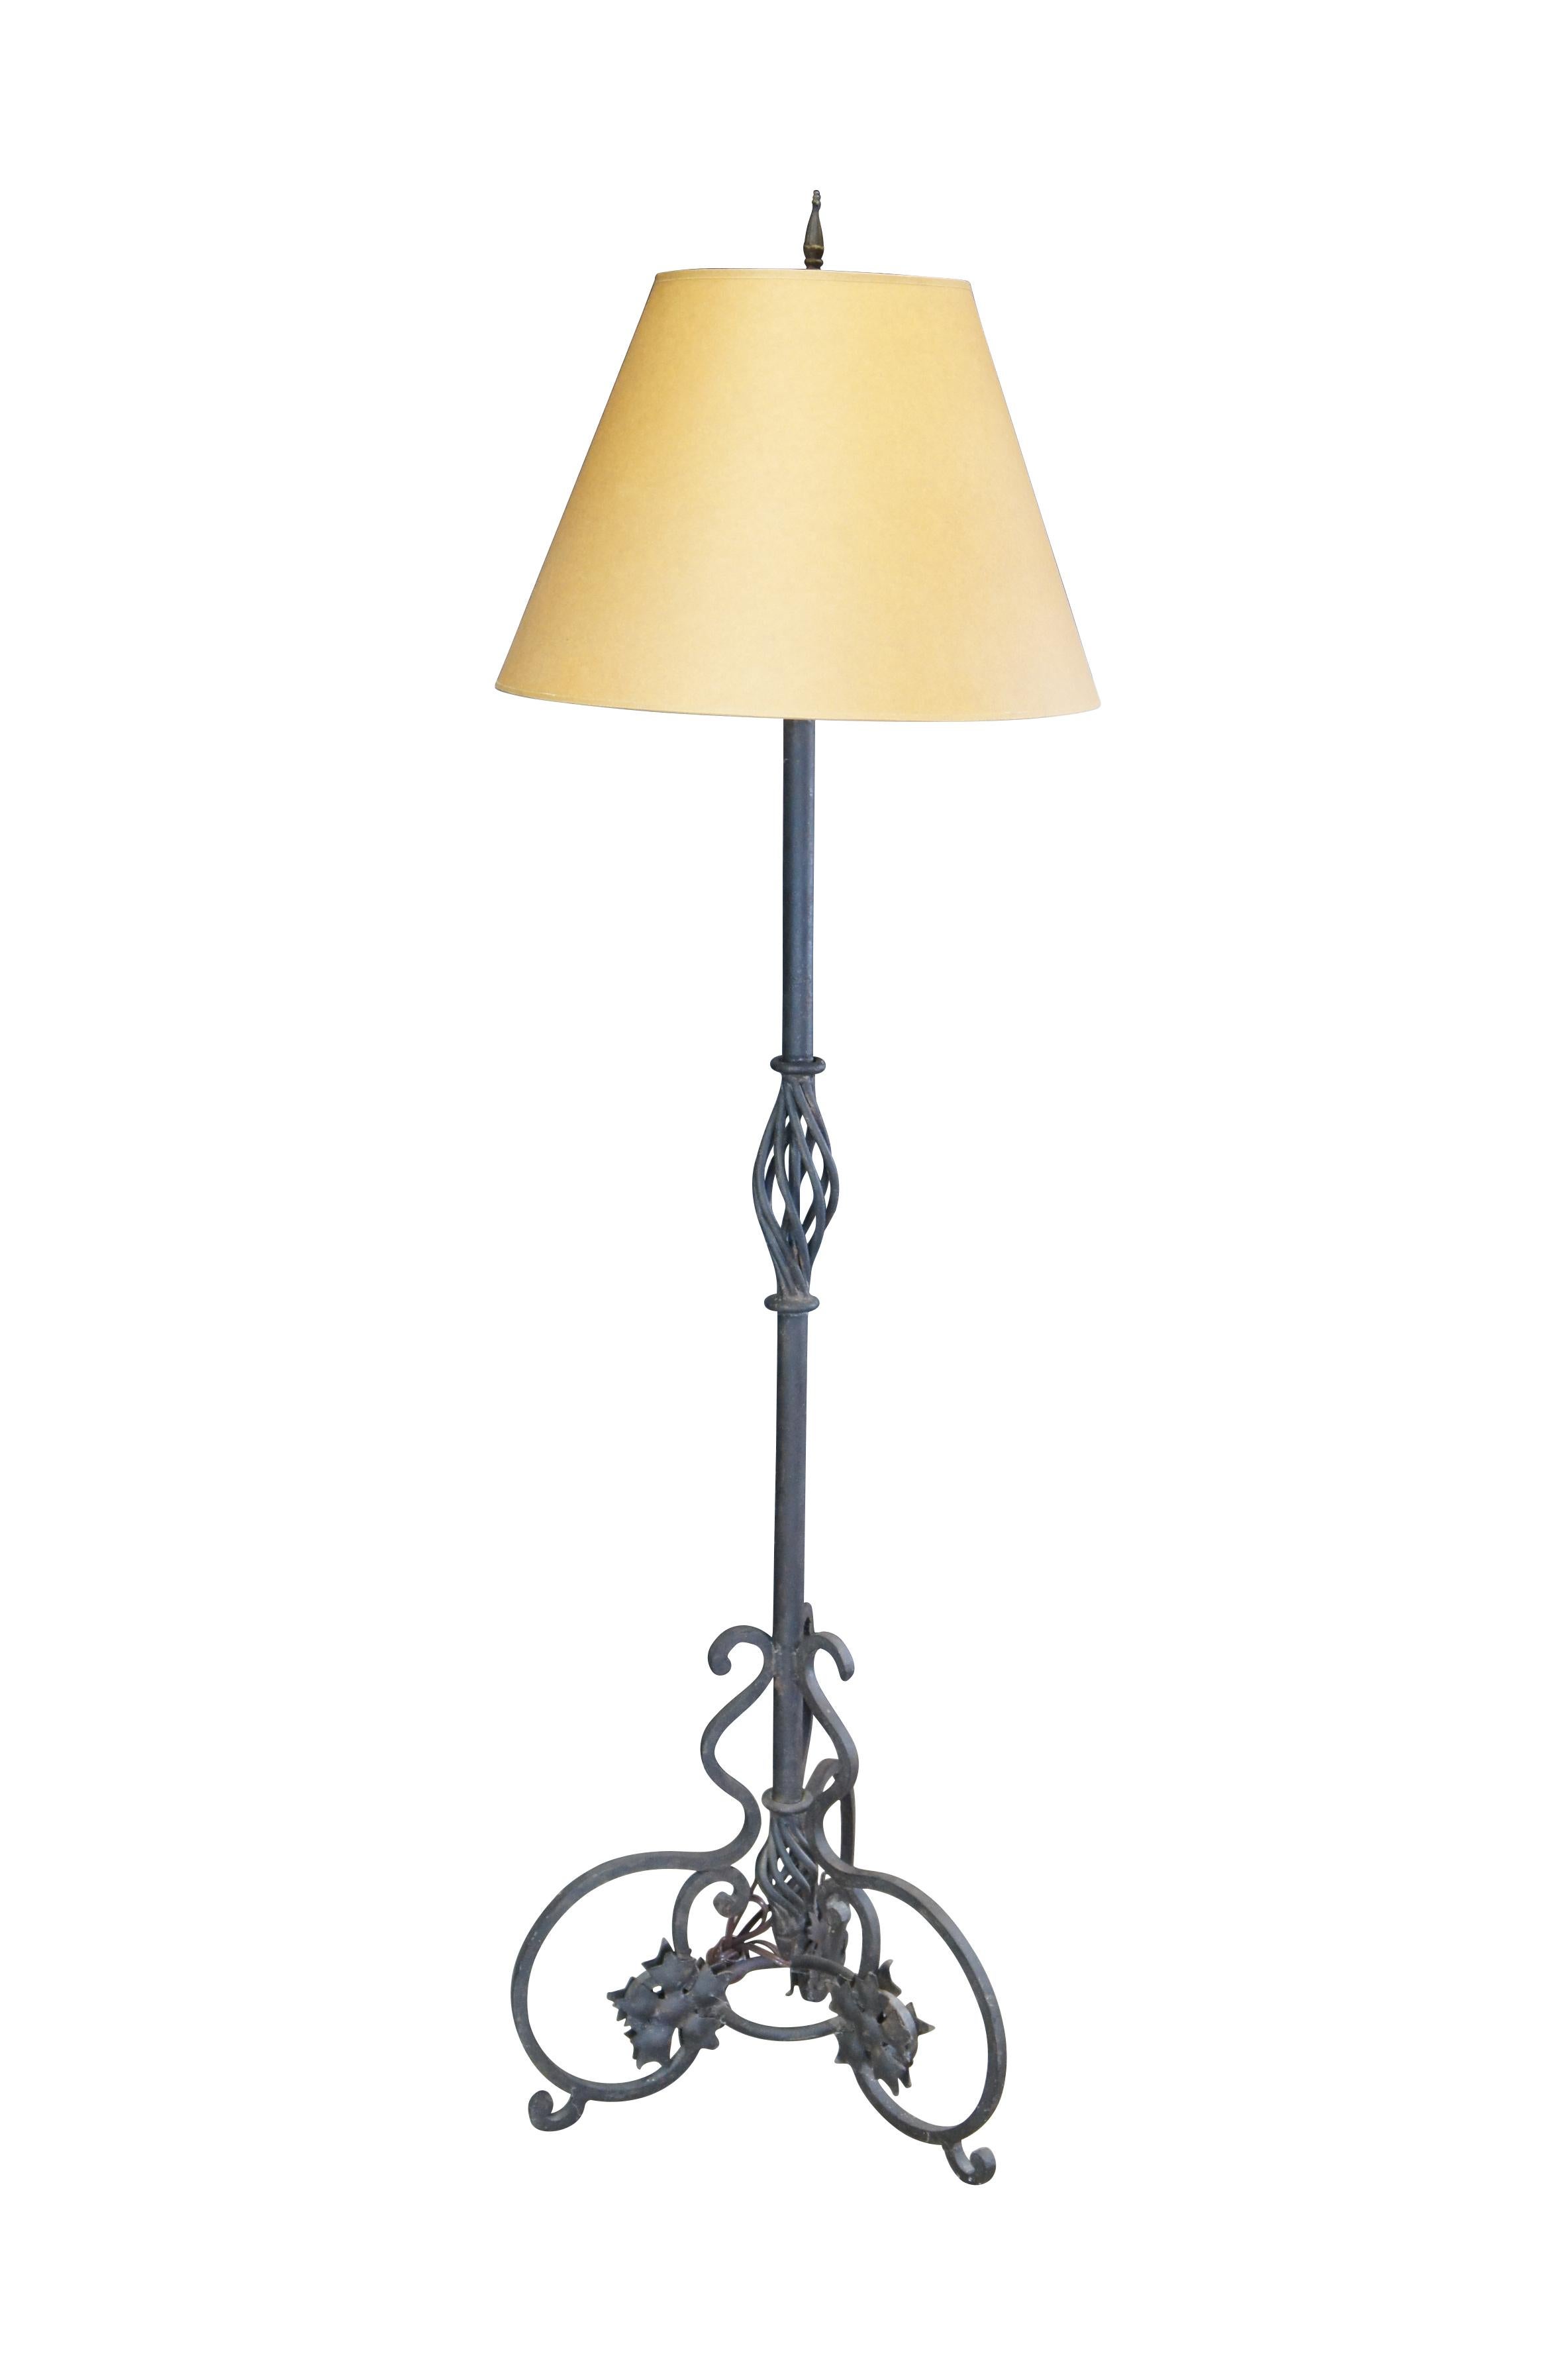 Late 20th Century Spanish Mediterranean ornate wrought iron floor lamp, will candlestick topper and drip pan.  Features a tripod base with scrolled accents and open twisted column at the center.  The base is accented by 5 petal florets. Includes